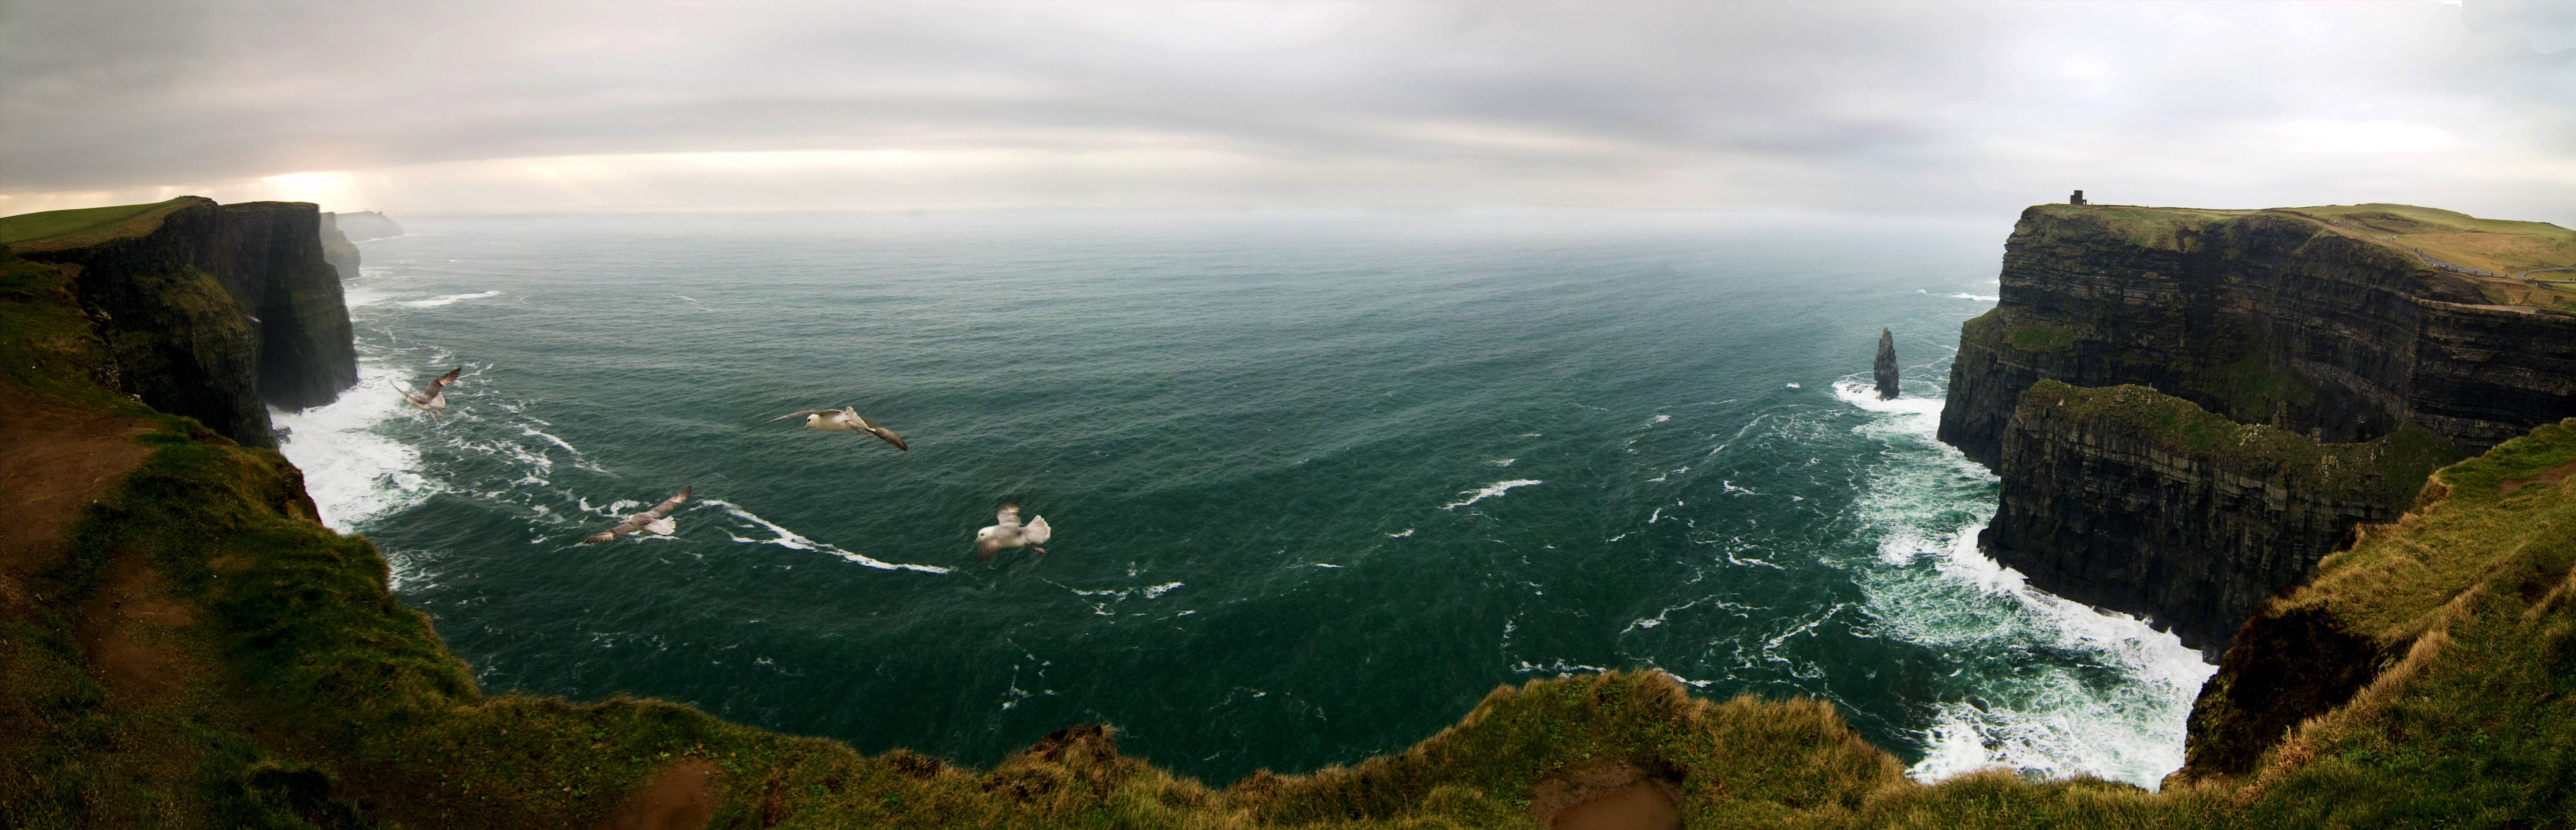 File:Panorama of Cliffs of Moher (2258424507).jpg - Wikimedia Commons